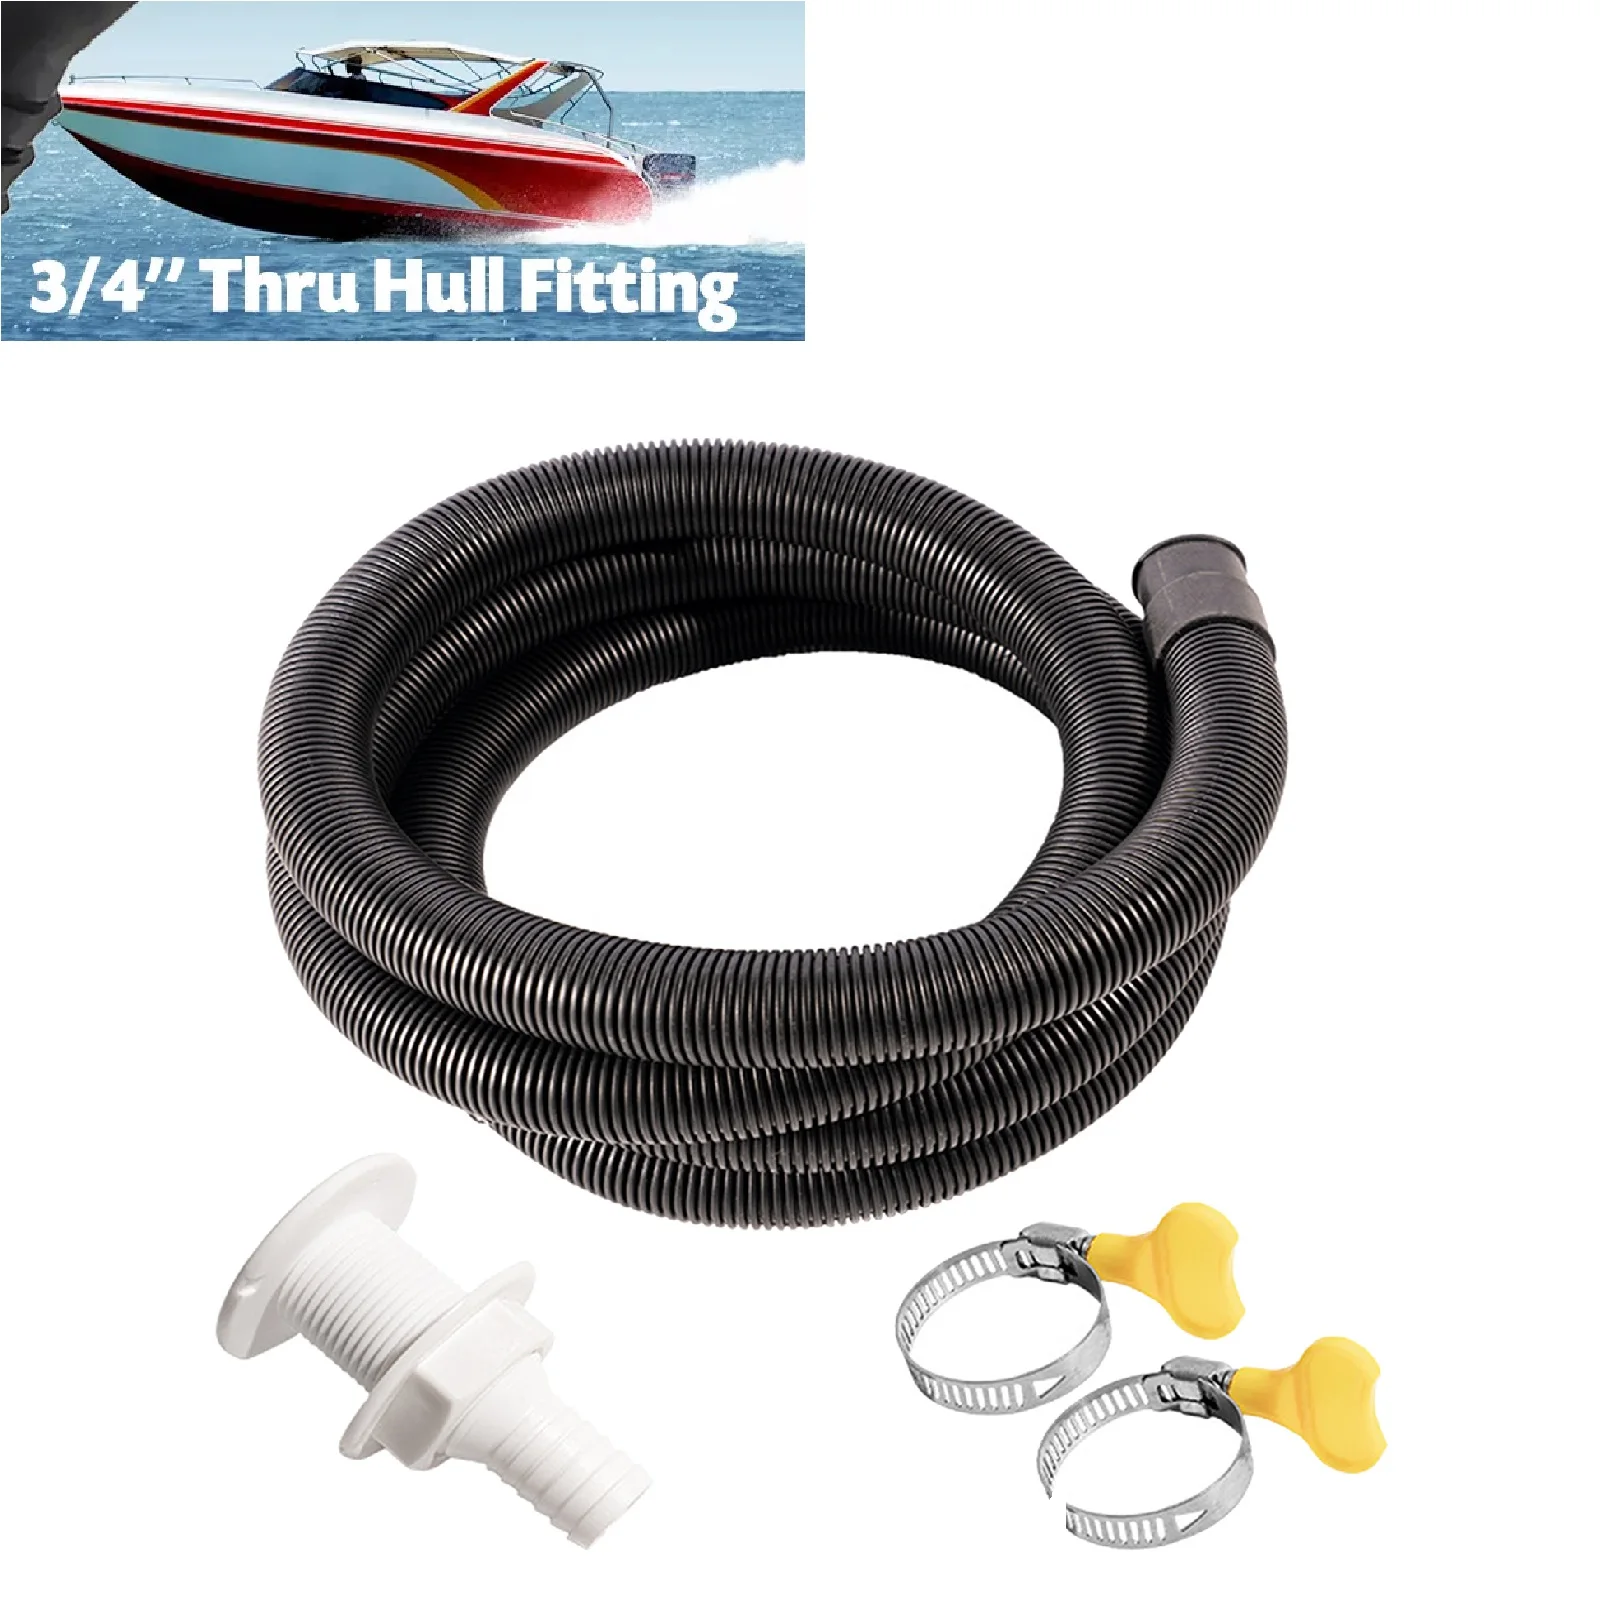 Flexible Bilge Pump Hose Installation Kit 3/4-Inch Diameter 6.6 FT for Boats with 2 Clamps and Thru-Hull Fitting etcr1000fa etcr1500fa flexible coil leakage current sensor ct diameter φ1000mm range 0a 10000a resolution 10ma differentiation